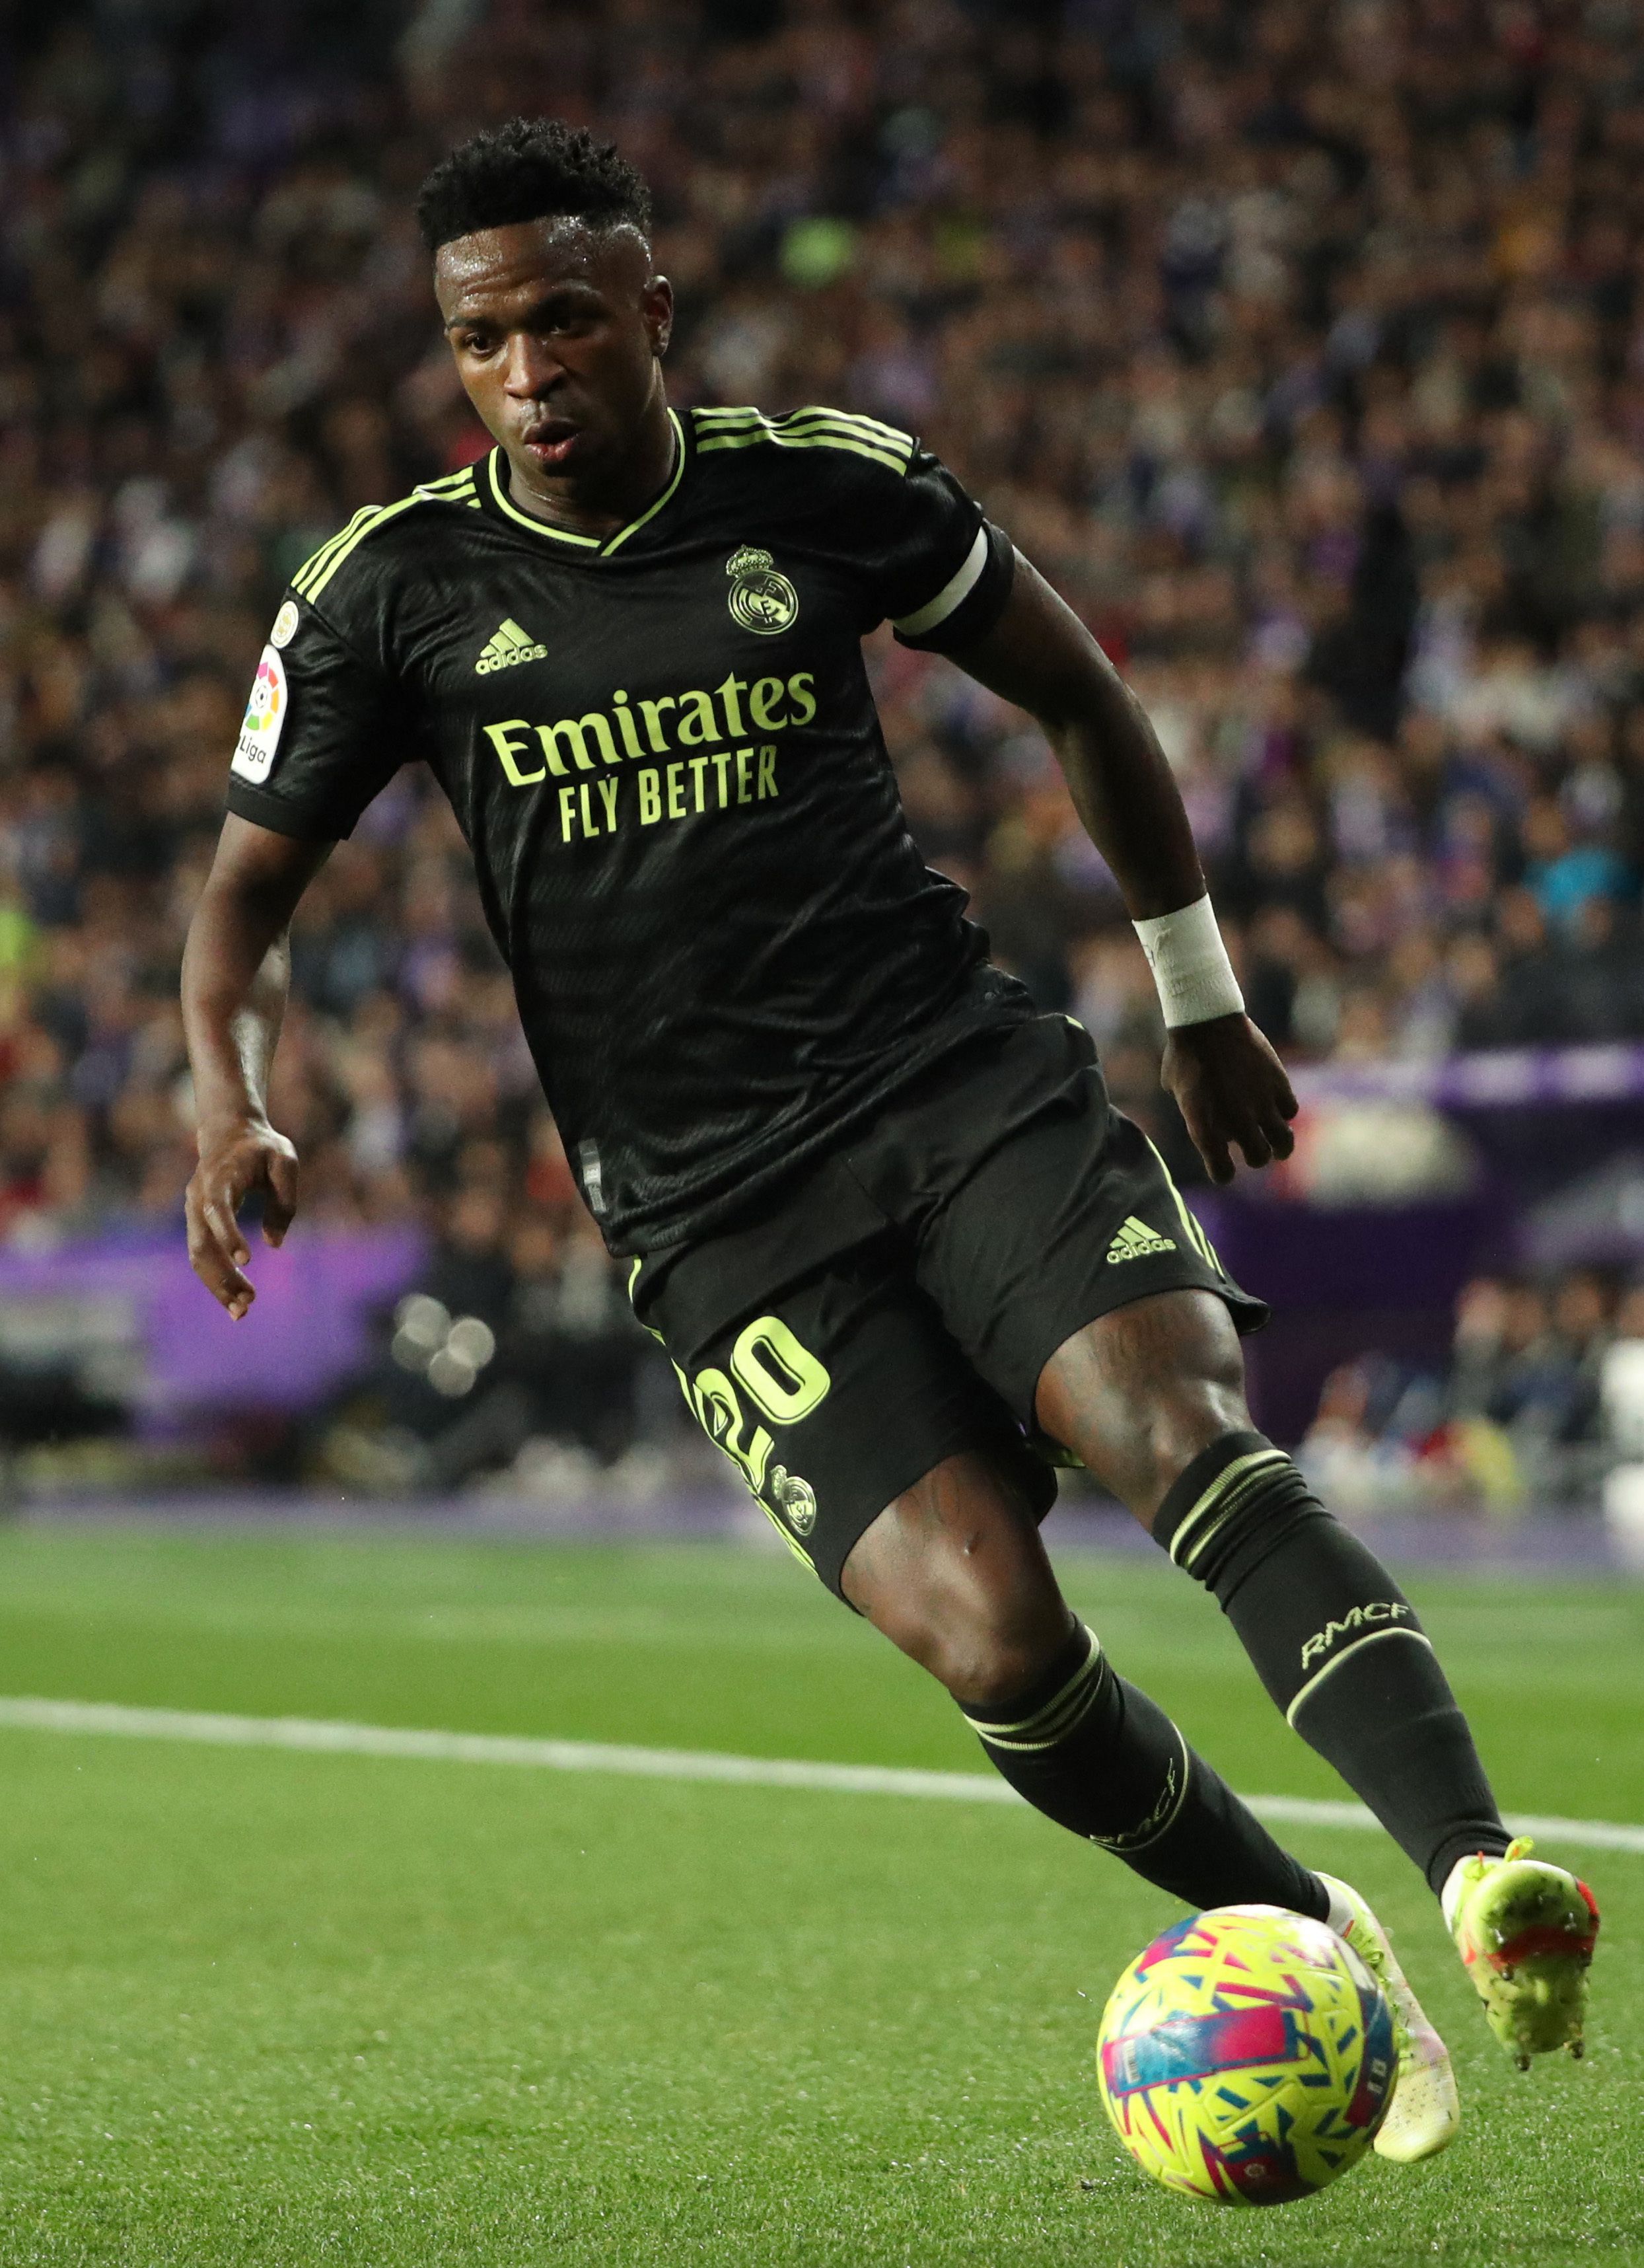 Vinicius Jr in action for Real Madrid vs Valladolid